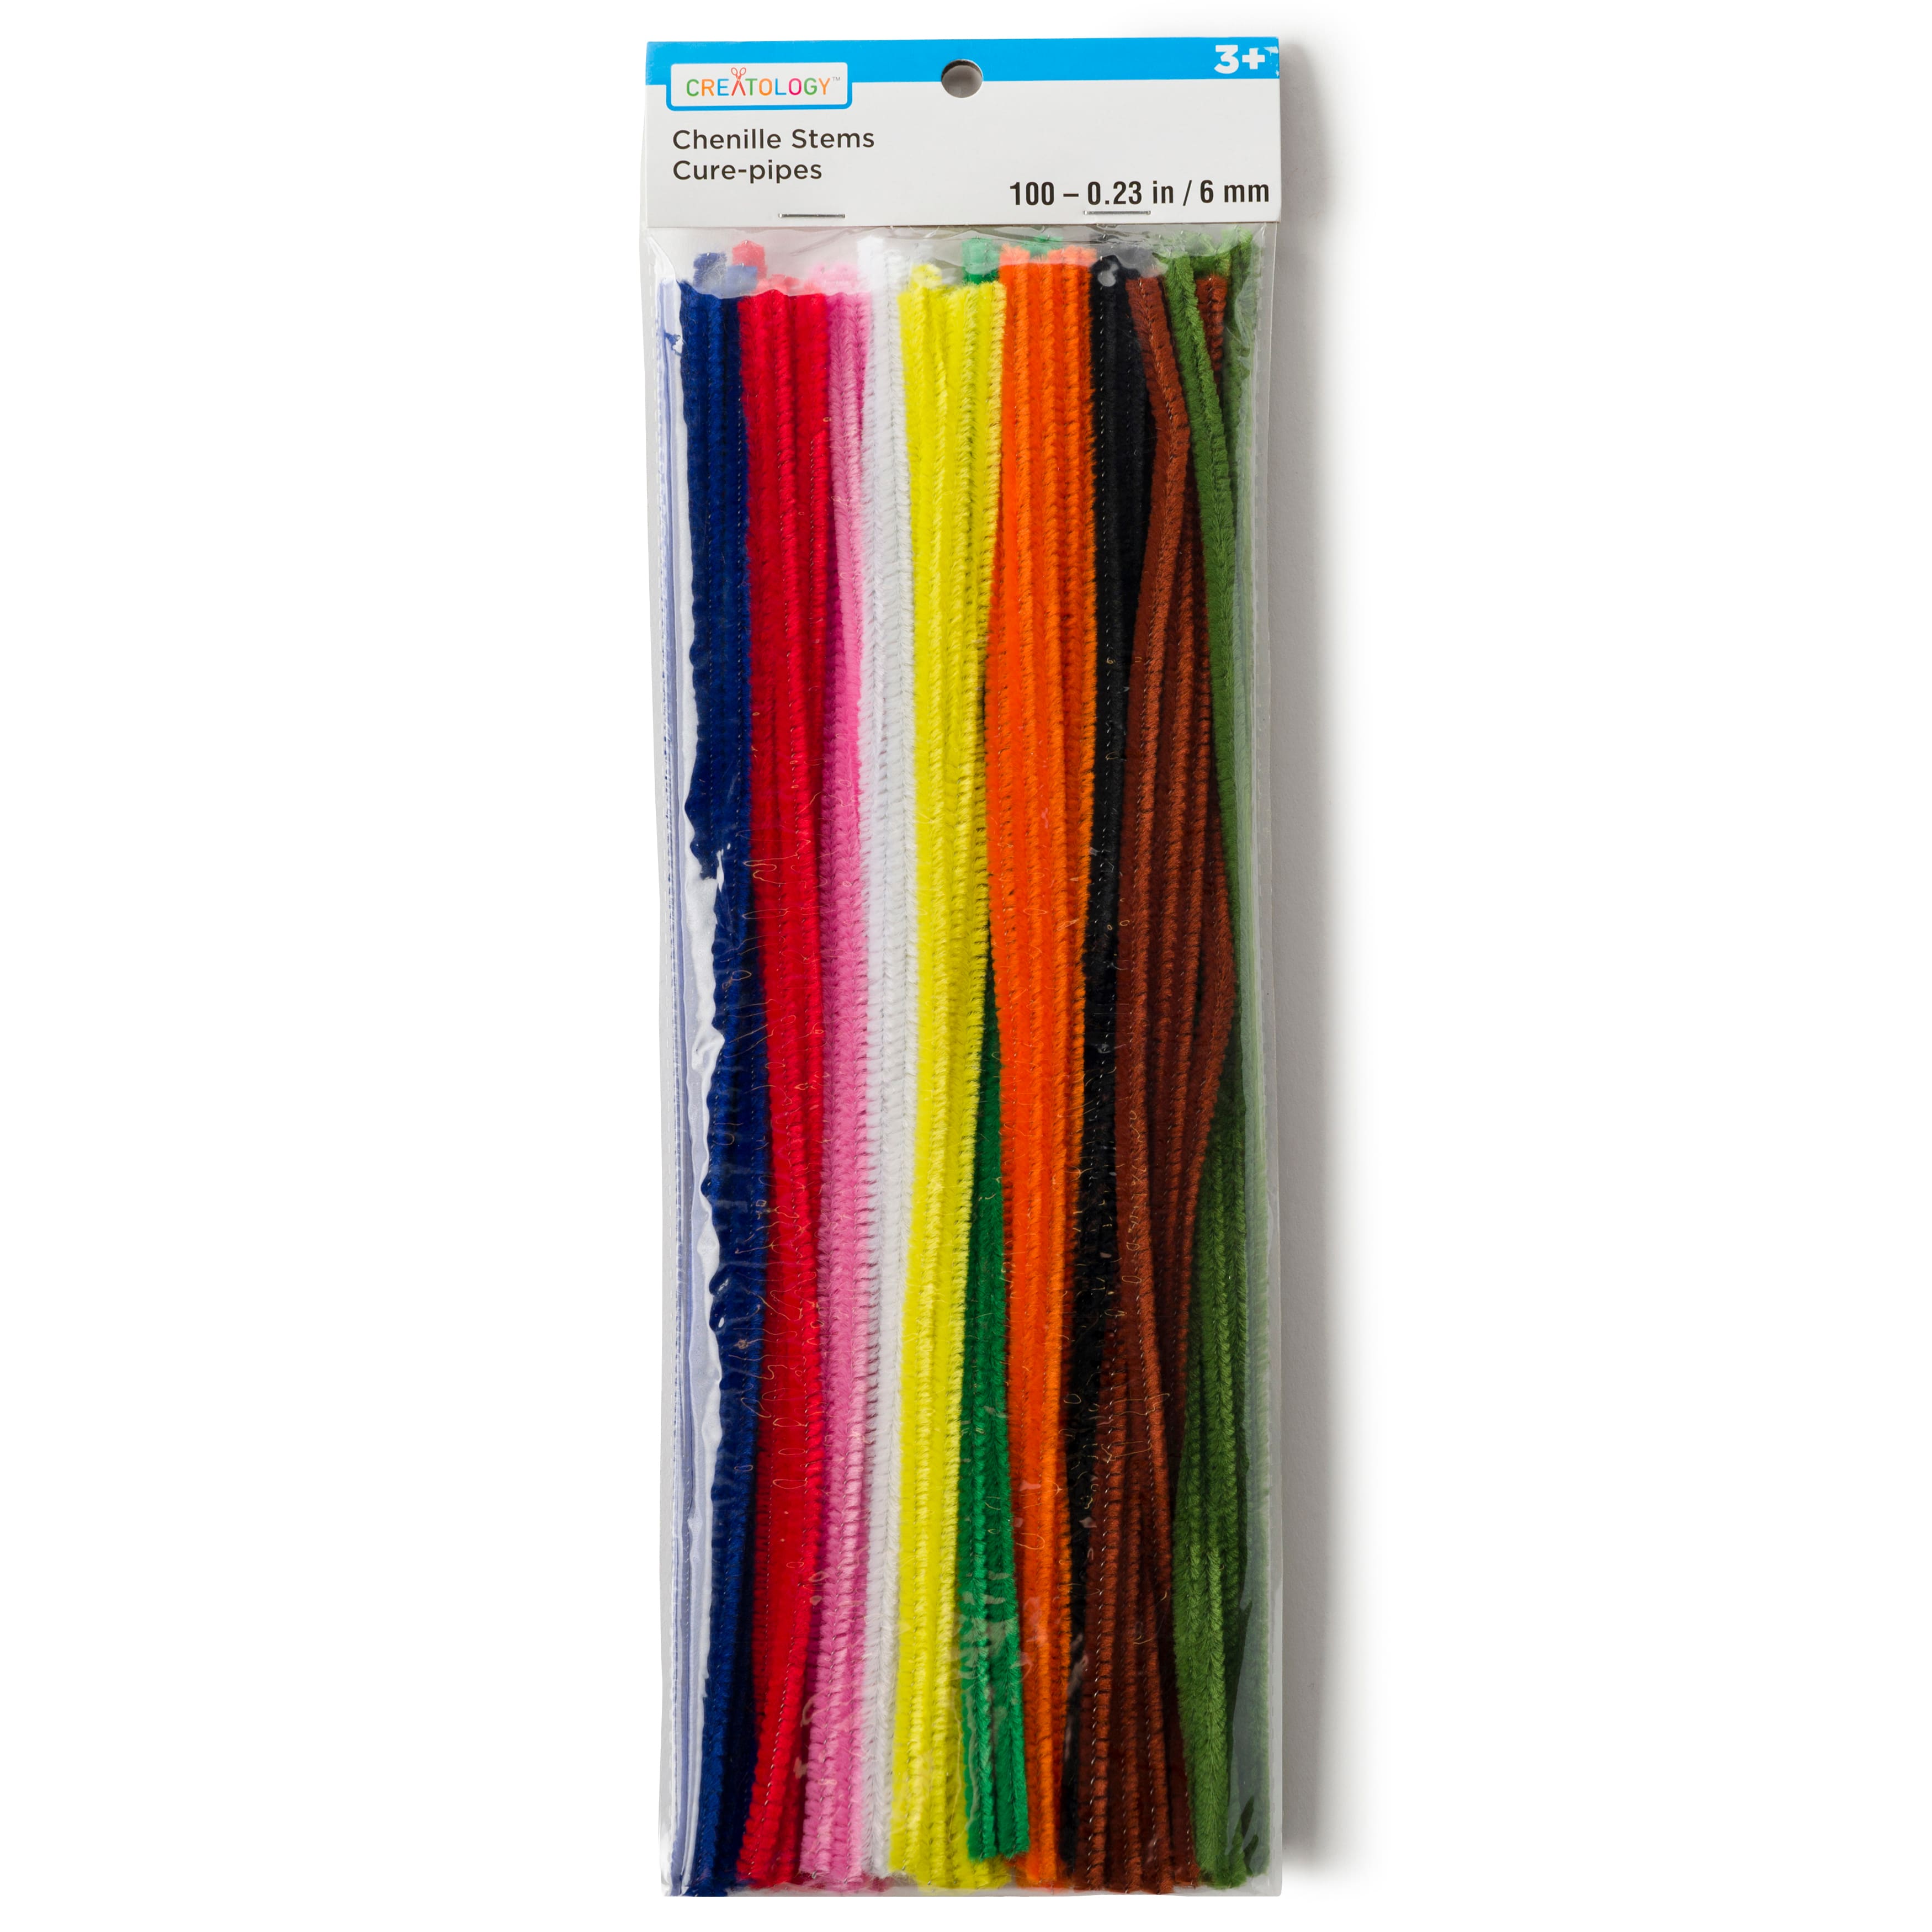 Colossal Stems (Pipe Cleaners) 19-1/2 Long, 15mm Thick - 50/pkg.